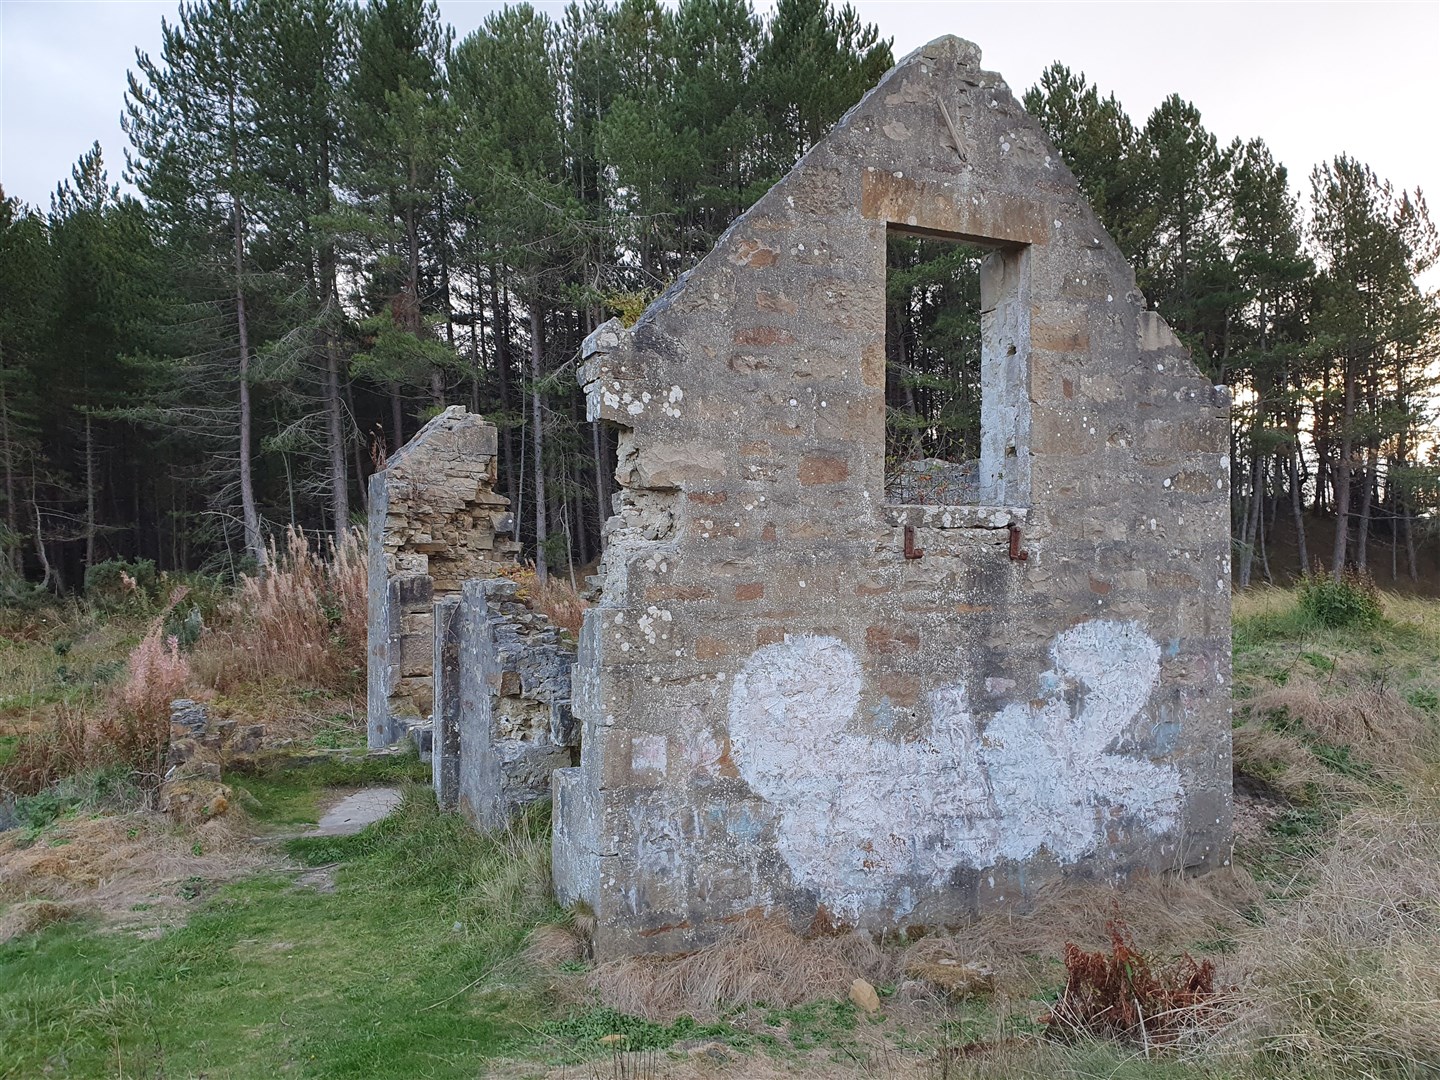 Plans have been submitted to turn the bothy into a holiday home.